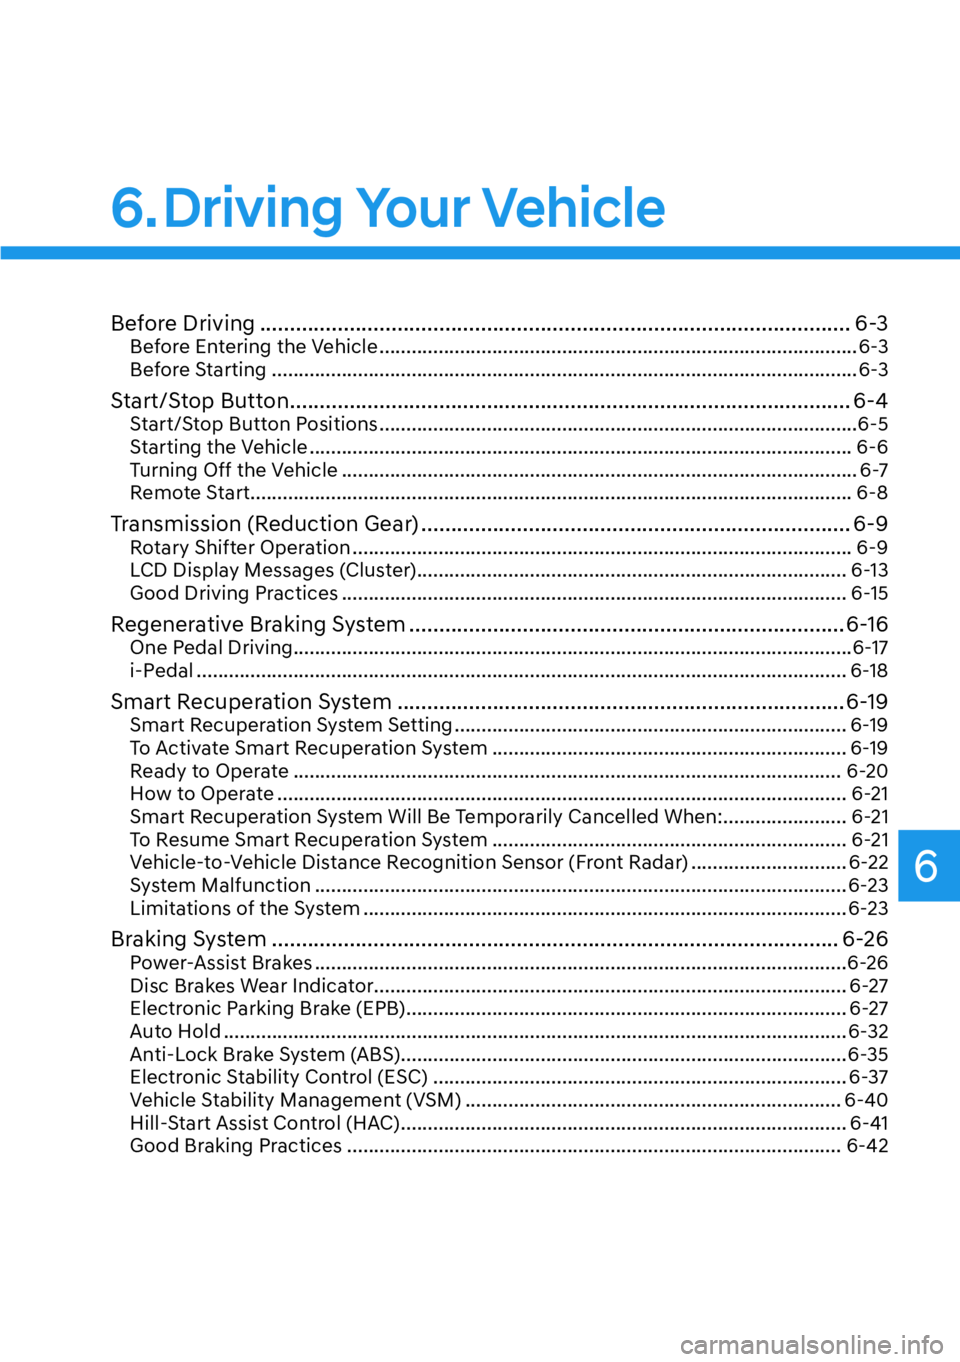 HYUNDAI IONIQ 5 2022 Service Manual 6
6. Driving Your Vehicle
Before Driving ................................................................................................... 6-3Before Entering the Vehicle ............................